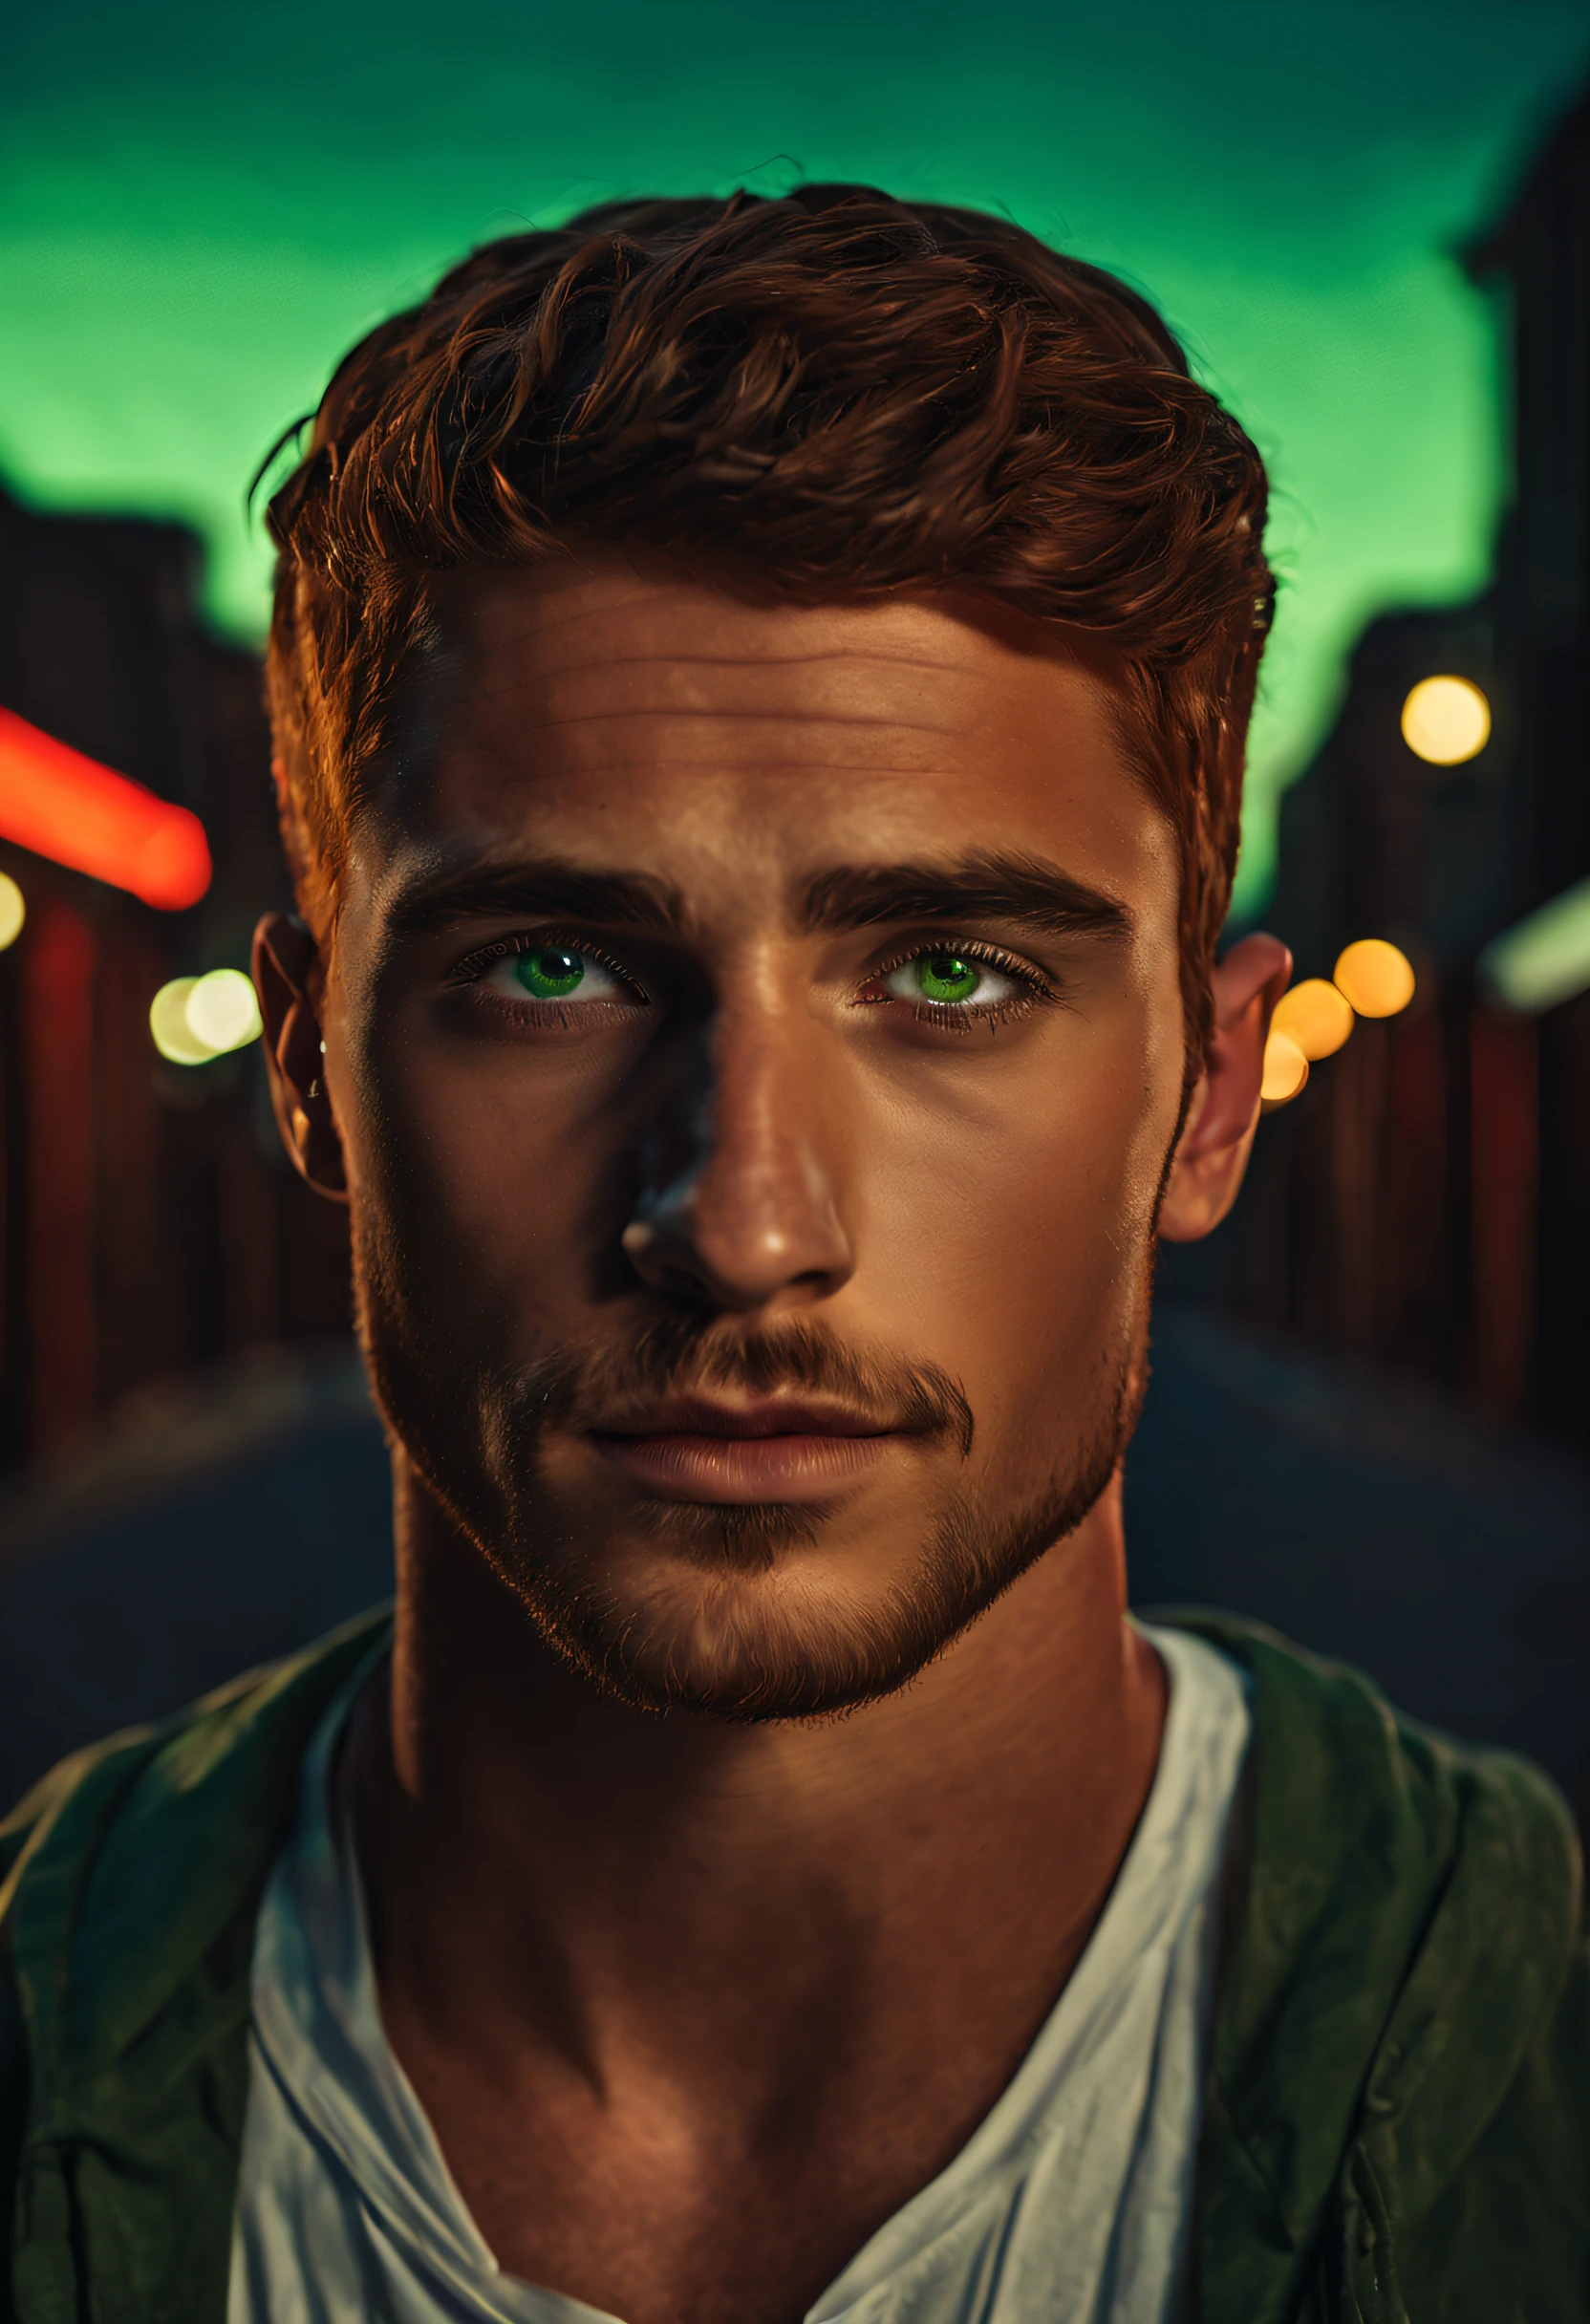 masterpiece, award -winning photography, handsome male, boy, 21 years old, light beard, red brown hair, green eyes, short hair, masculine facial features. confident, background with neon, utopian city, Surrealism, Minimalism, cinematic style, drop shadow, film grain, 1080P, anatomically correct